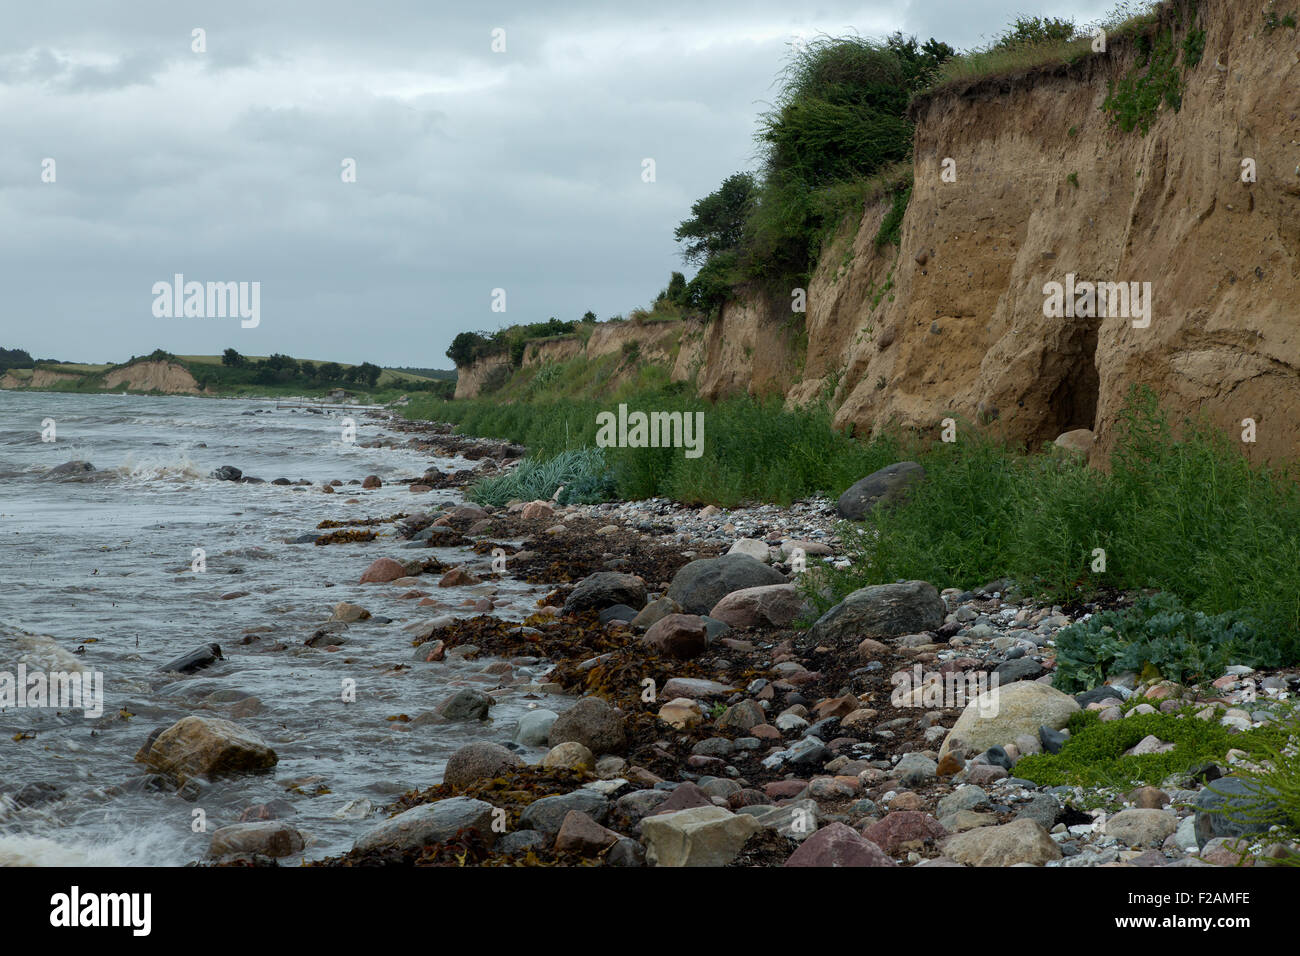 Cliff of boulder clay and beach, Fyns Hoved, Funen, Denmark Stock Photo